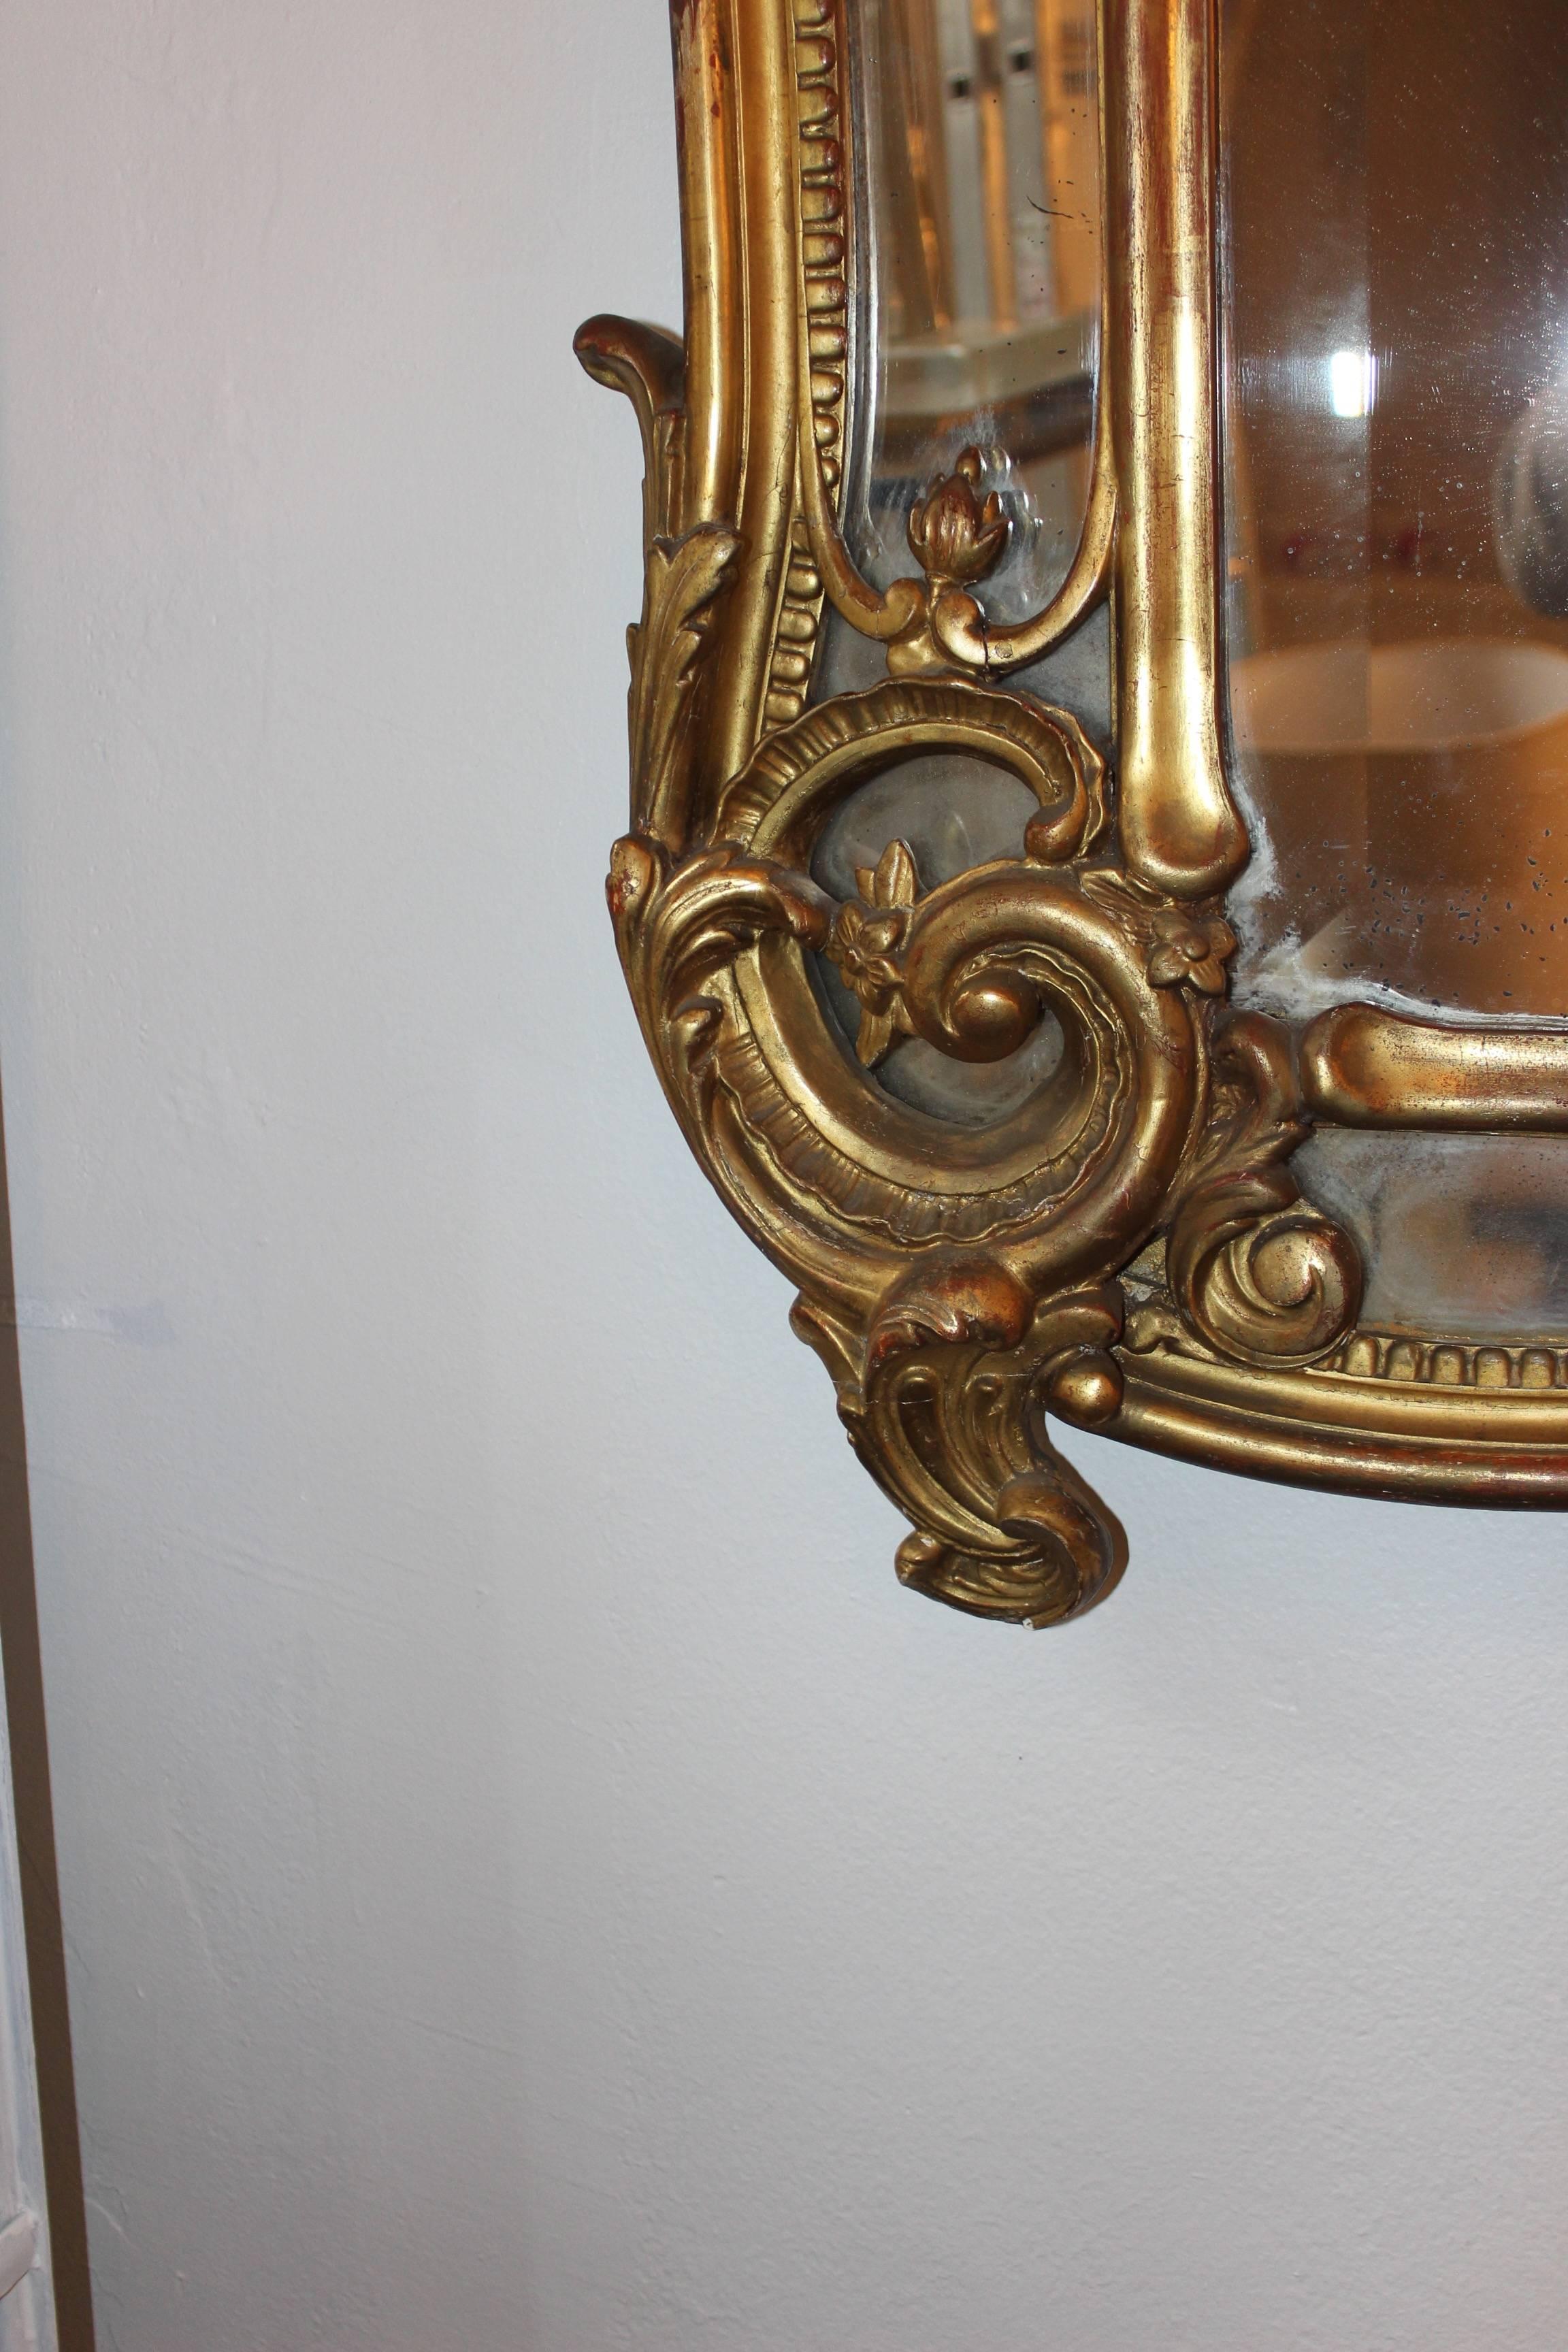 Large French Regency style gilt mirror, mid-19th century. Makes an elegant statement in any interior.